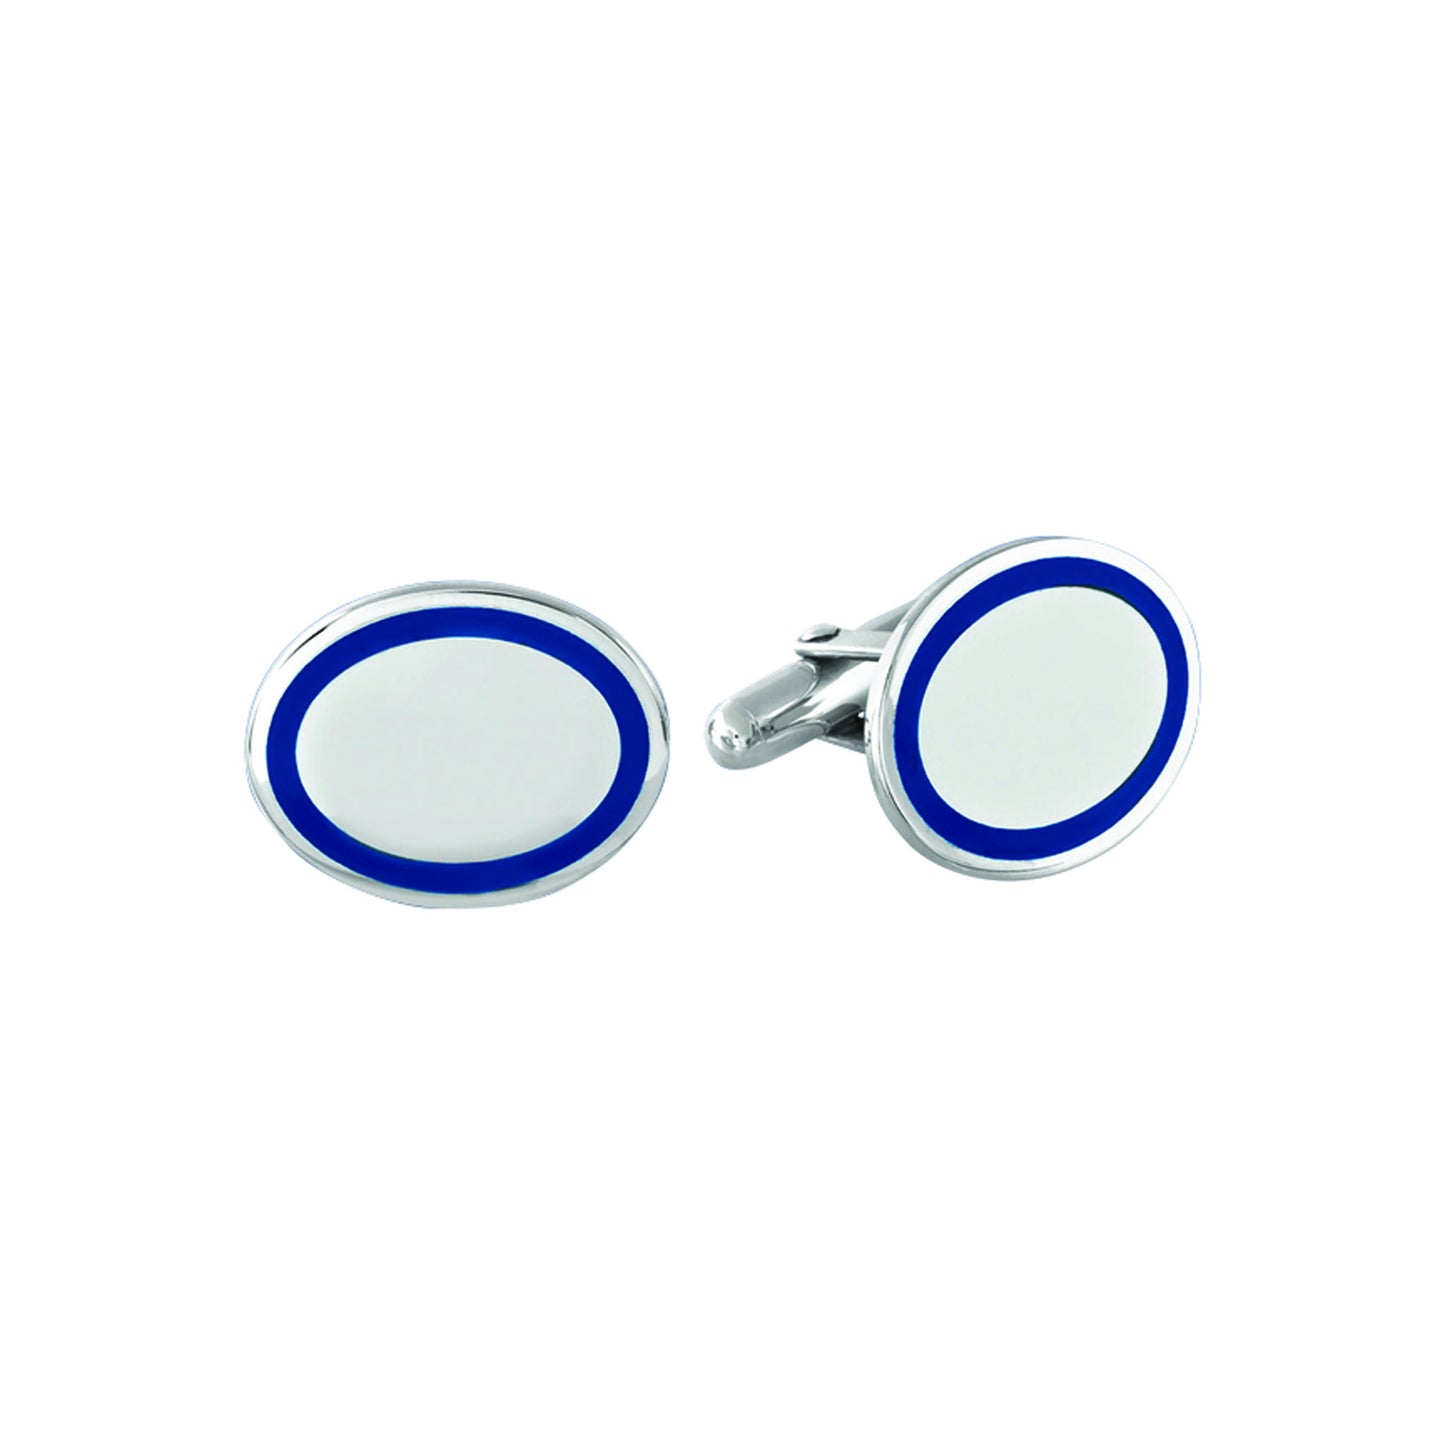 A sterling silver oval cufflinks with blue displayed on a neutral white background.